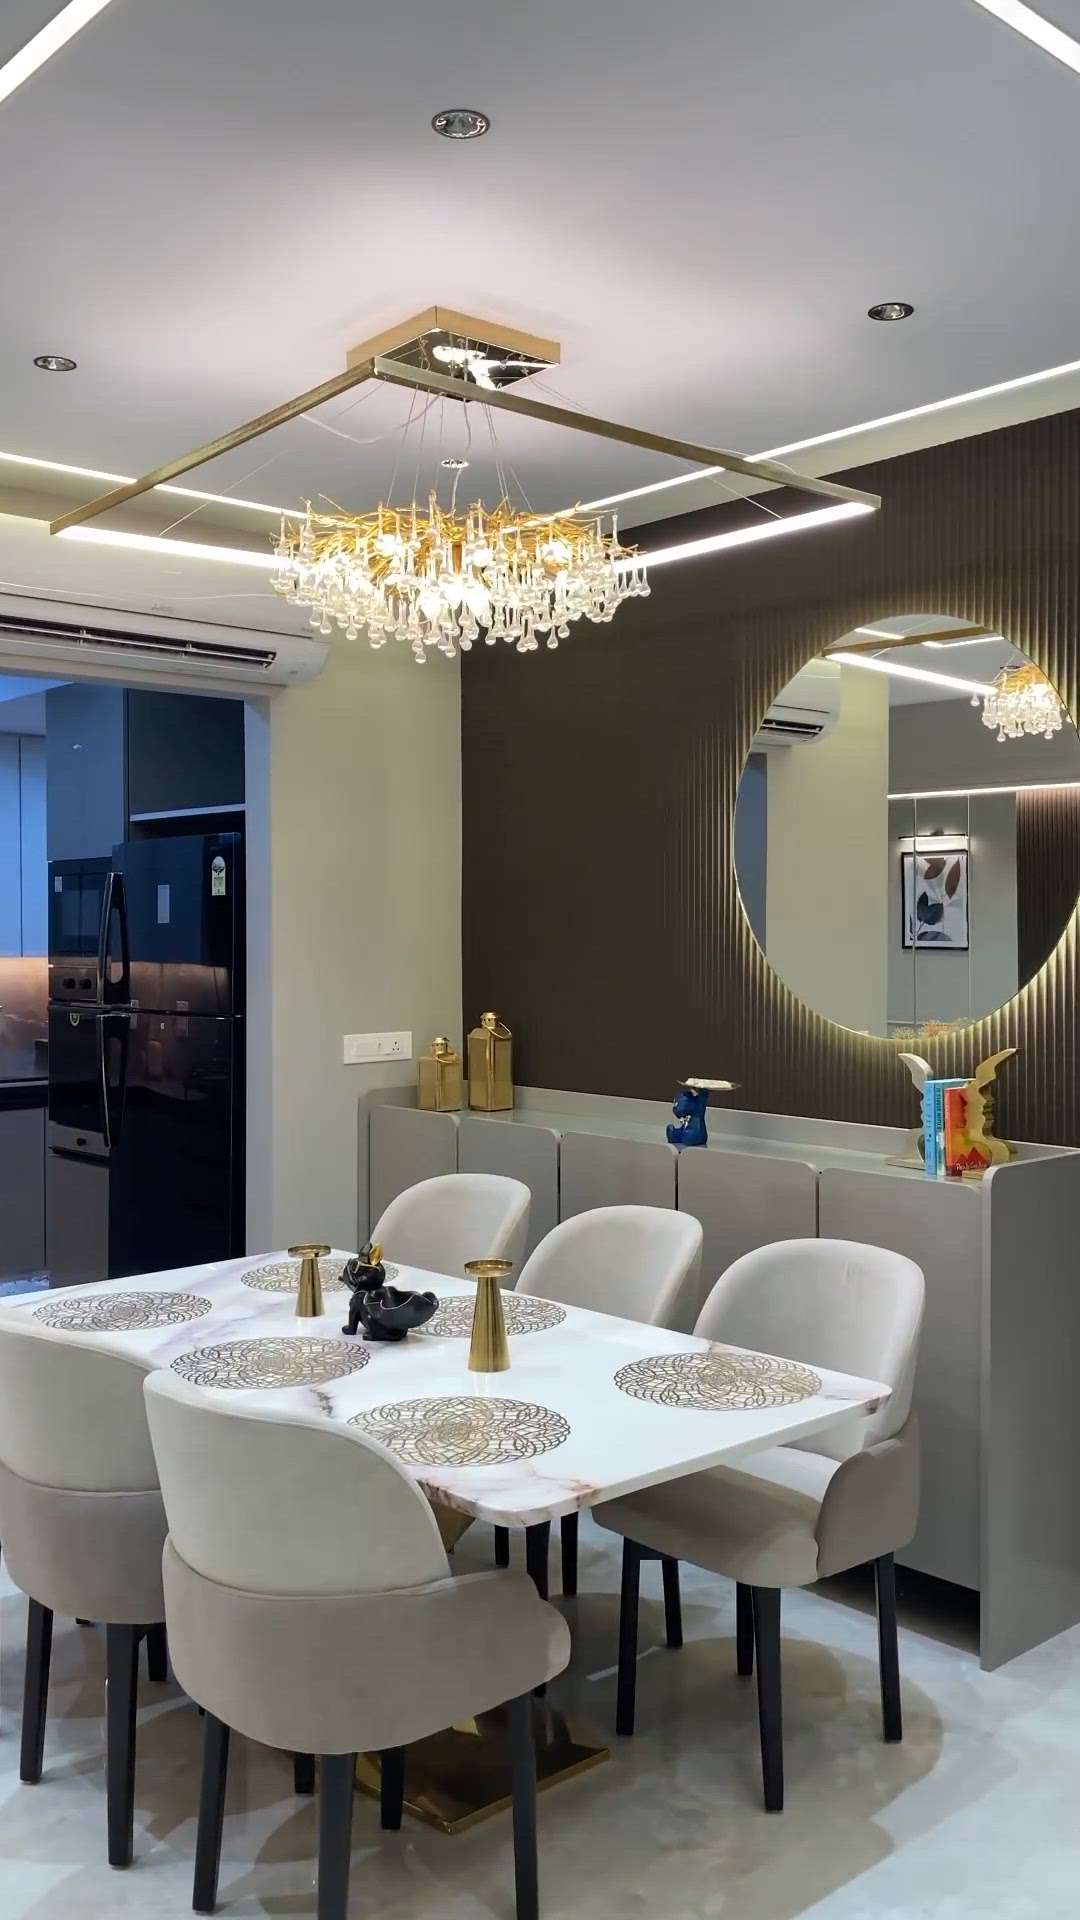 Looking for one-stop interior design solutions for your dream home or office? 😍
At Stunning decor, we don't just build homes but craft your desires into fresh designs to make you fall in love with your home! ✨
Get your dream home designed by us 💫furniture
📩 Comment or DM ' smart ' to order
📞Contact -
💻 https://stunningdecor..com
Follow 👉@stunningdecor
Follow👉 @stunningdecor
Follow👉 @stunninhdecor
➖➖➖➖➖➖➖➖
#interiordesign #designinterior #interiordesigner #designdeinteriores #interiordesignideas #interiordesigners #designerdeinteriores #interiordesigns #interiordesigninspiration
. # # #